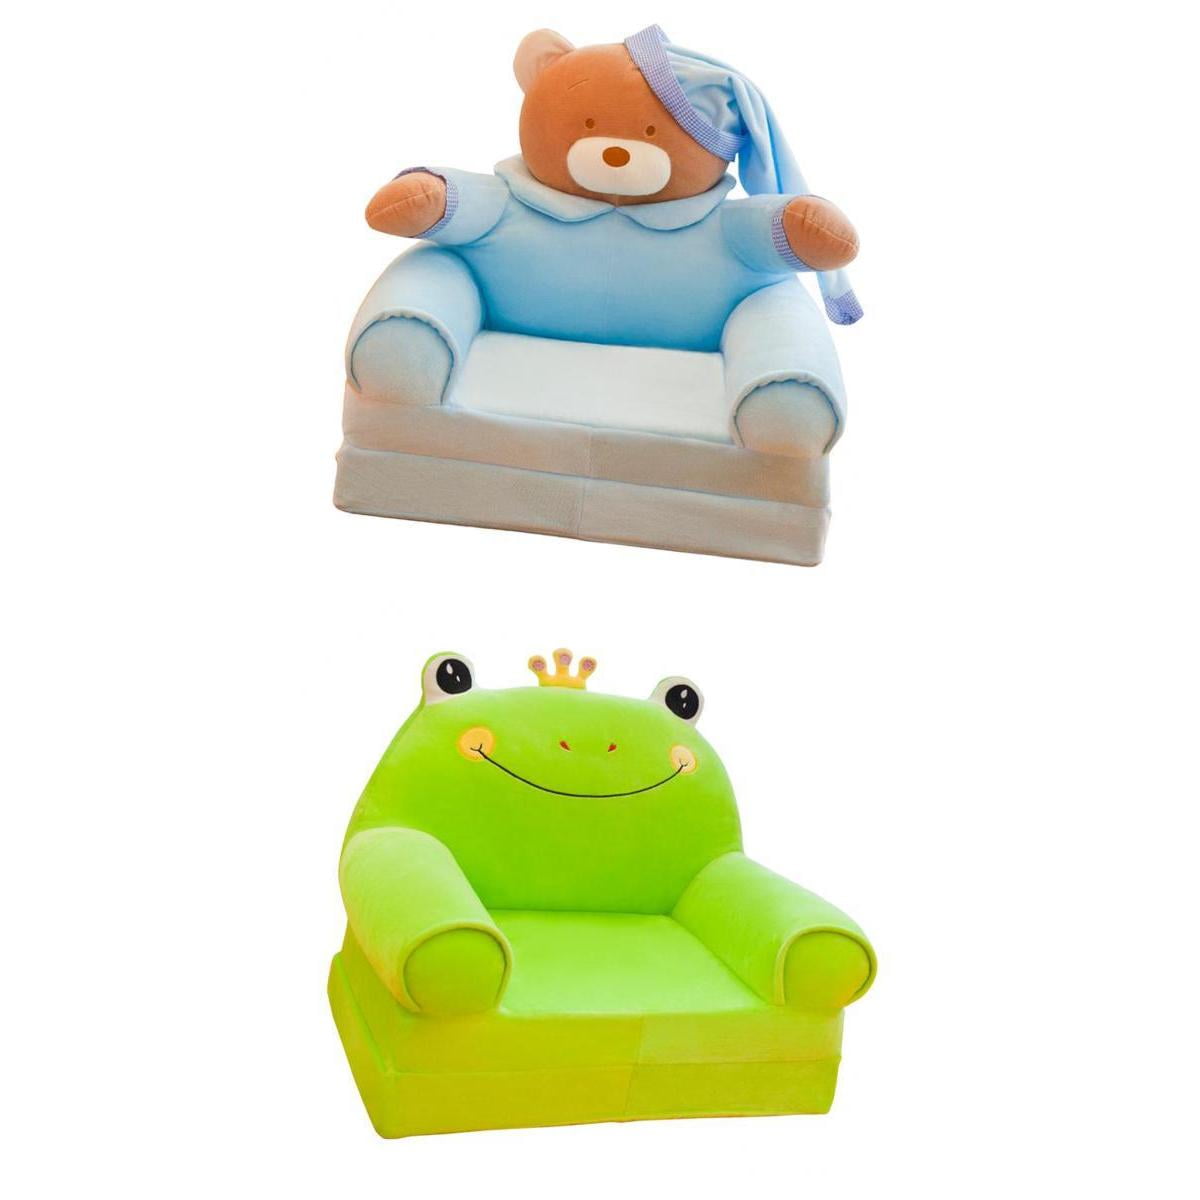 2pcs Kids Foldable Sofa Chair Cover Cartoon Animal Couch Cover for Children 